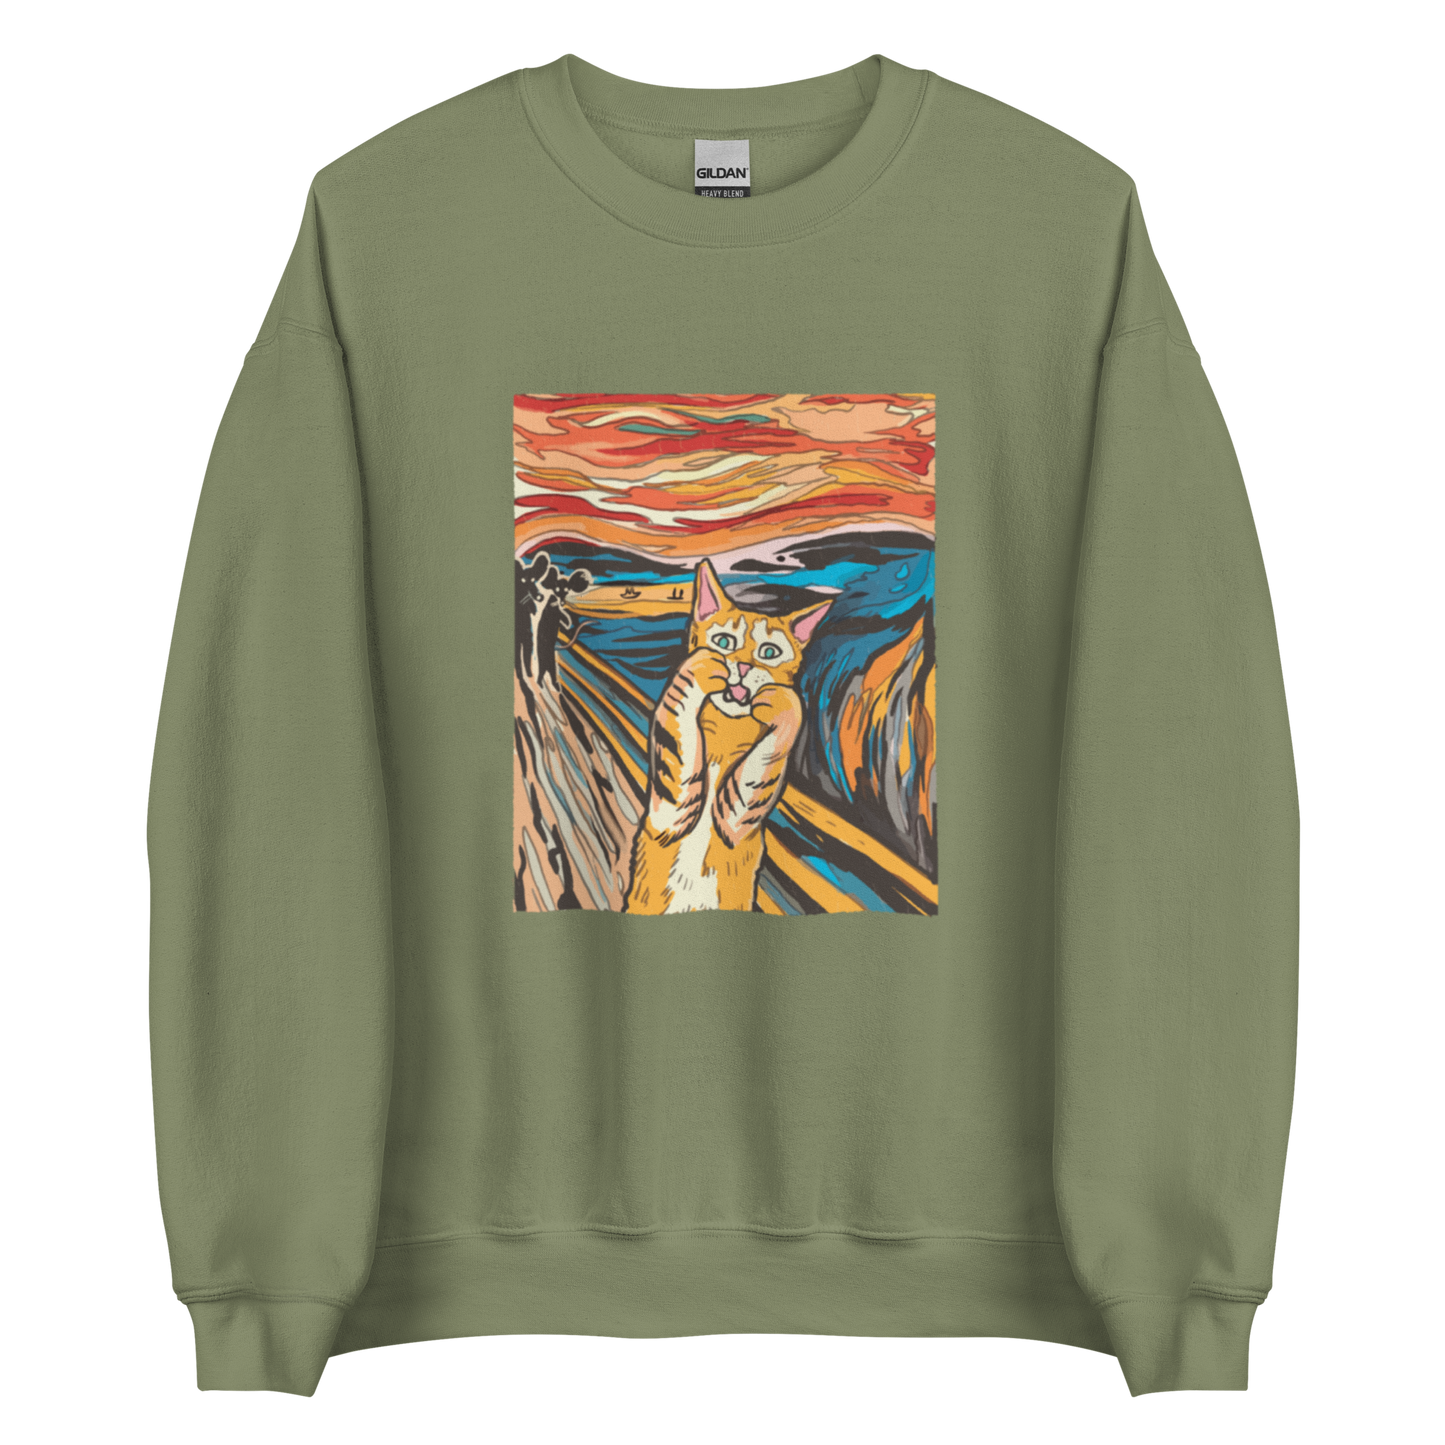 Military Green Screaming Cat Sweatshirt featuring an Edvard Munch's 'The Scream' graphic on the chest - Funny Graphic Cat Sweatshirts - Boozy Fox